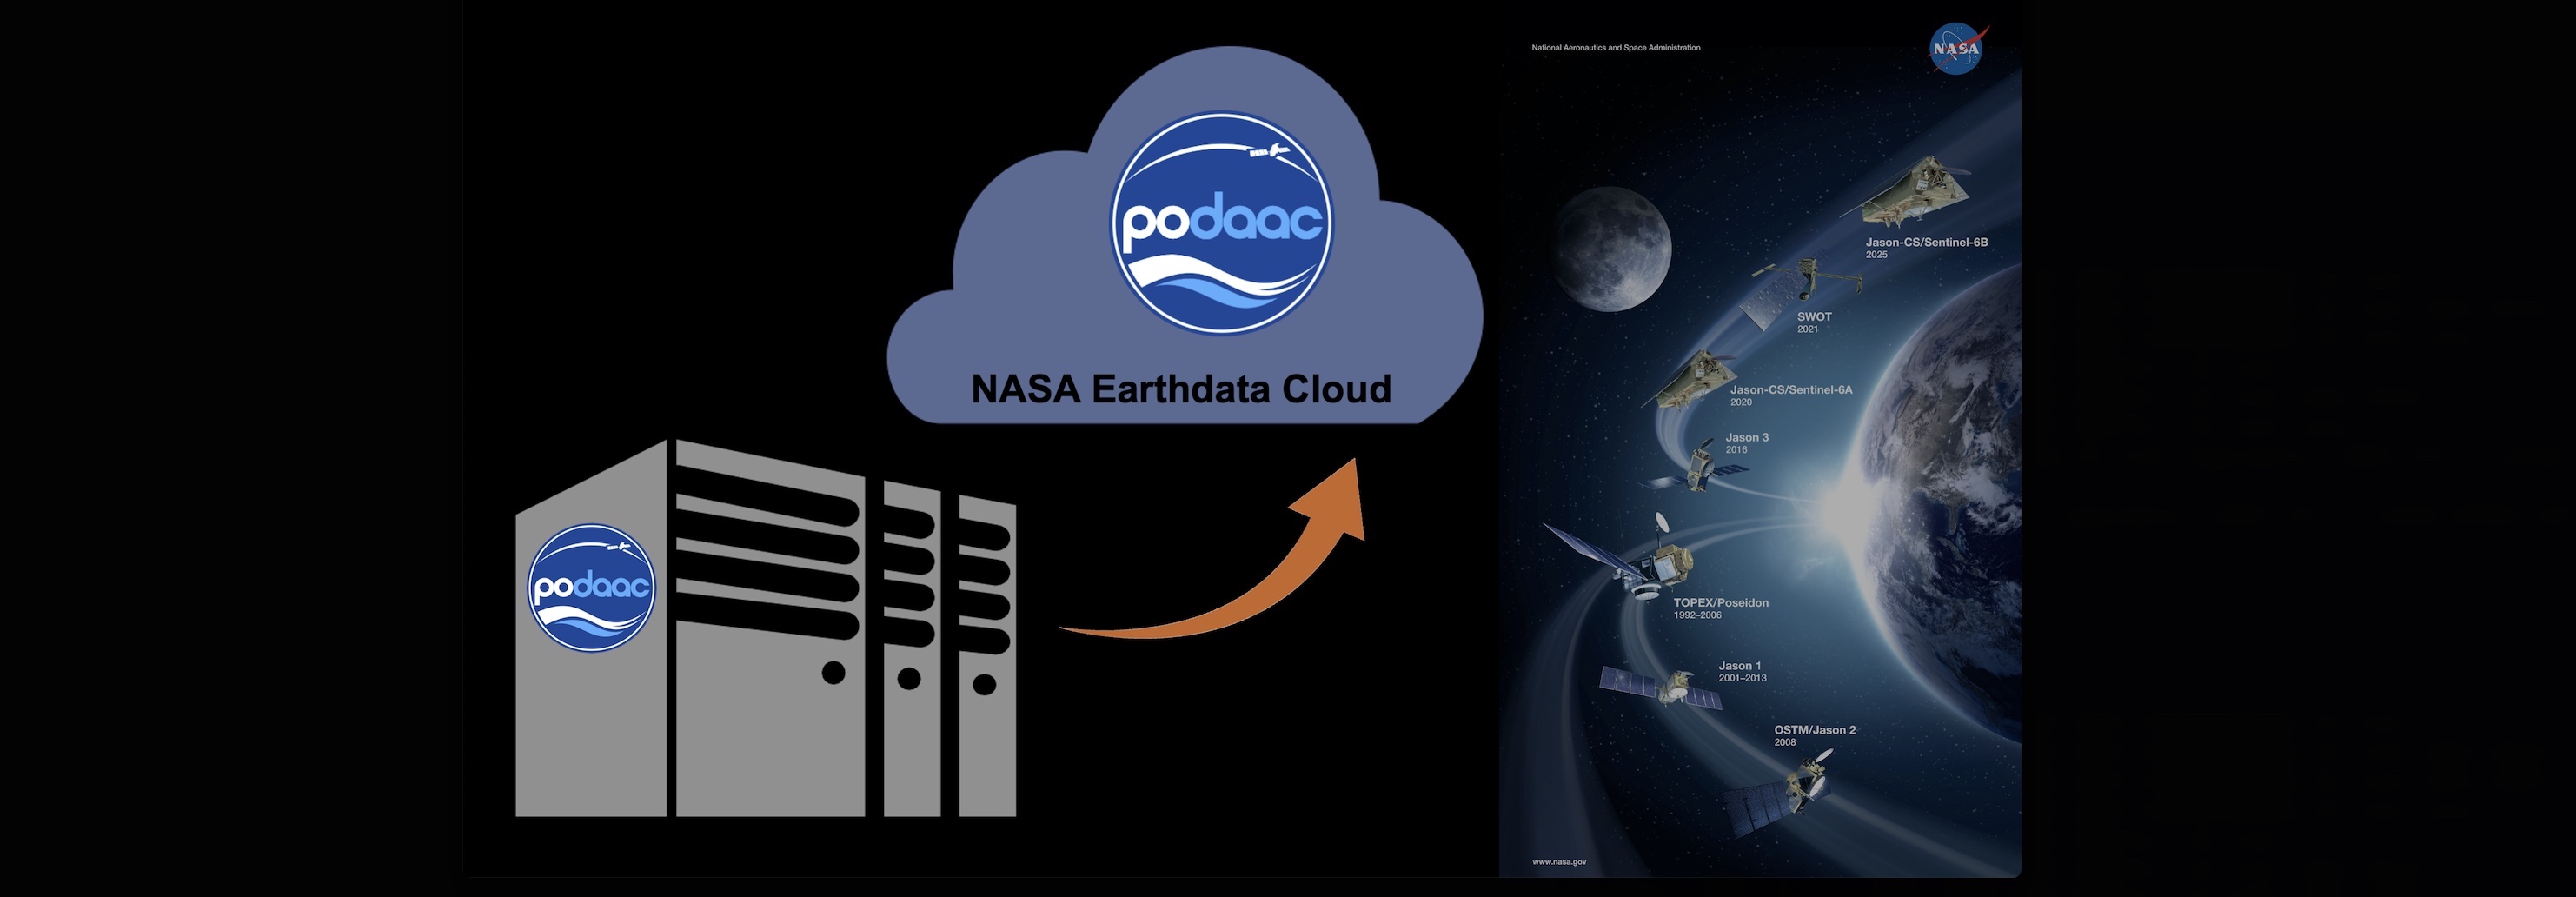 This graphic illustrates that the PO.DAAC data archive is being migrated to the NASA Earthdata Cloud.